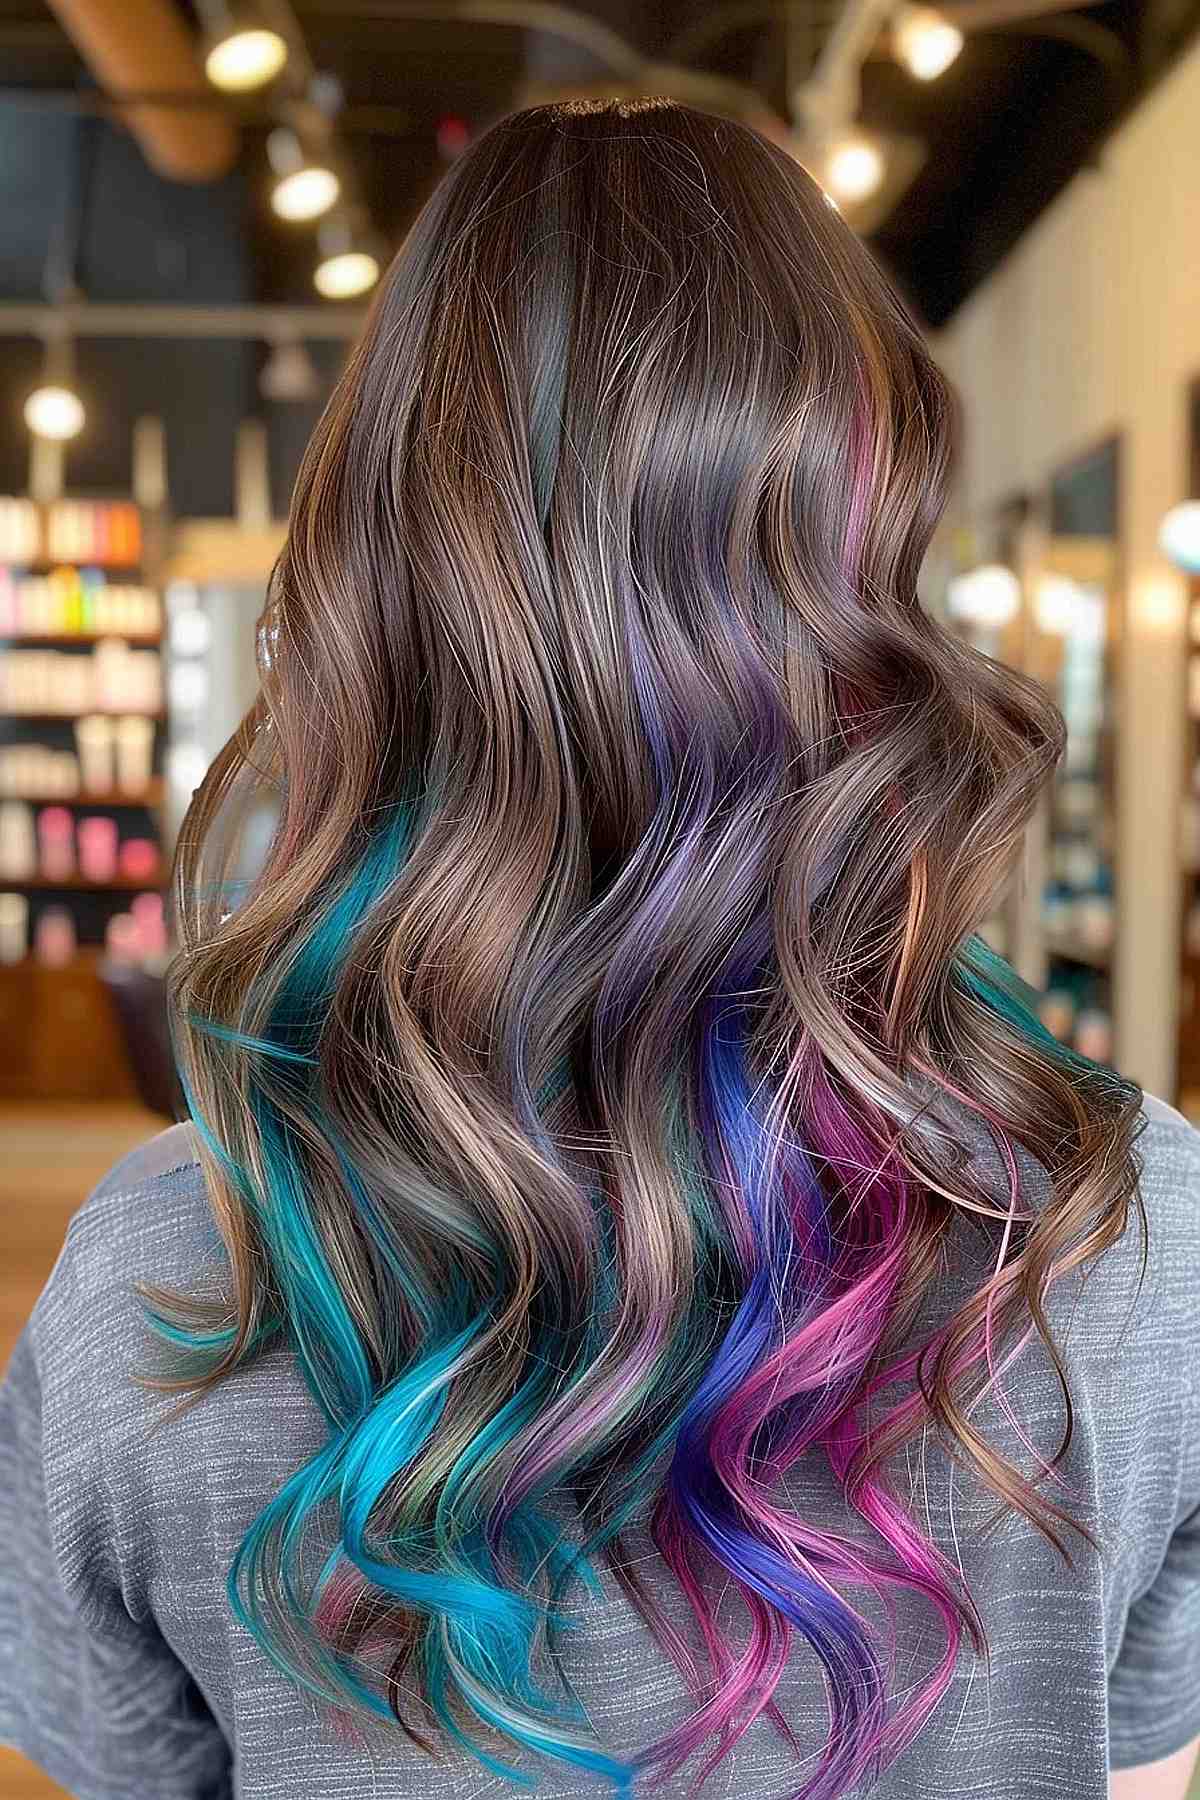 Long, wavy mushroom brown hair with hidden colorful peekaboo highlights in blue, purple, and pink, adding a playful contrast and vibrancy.